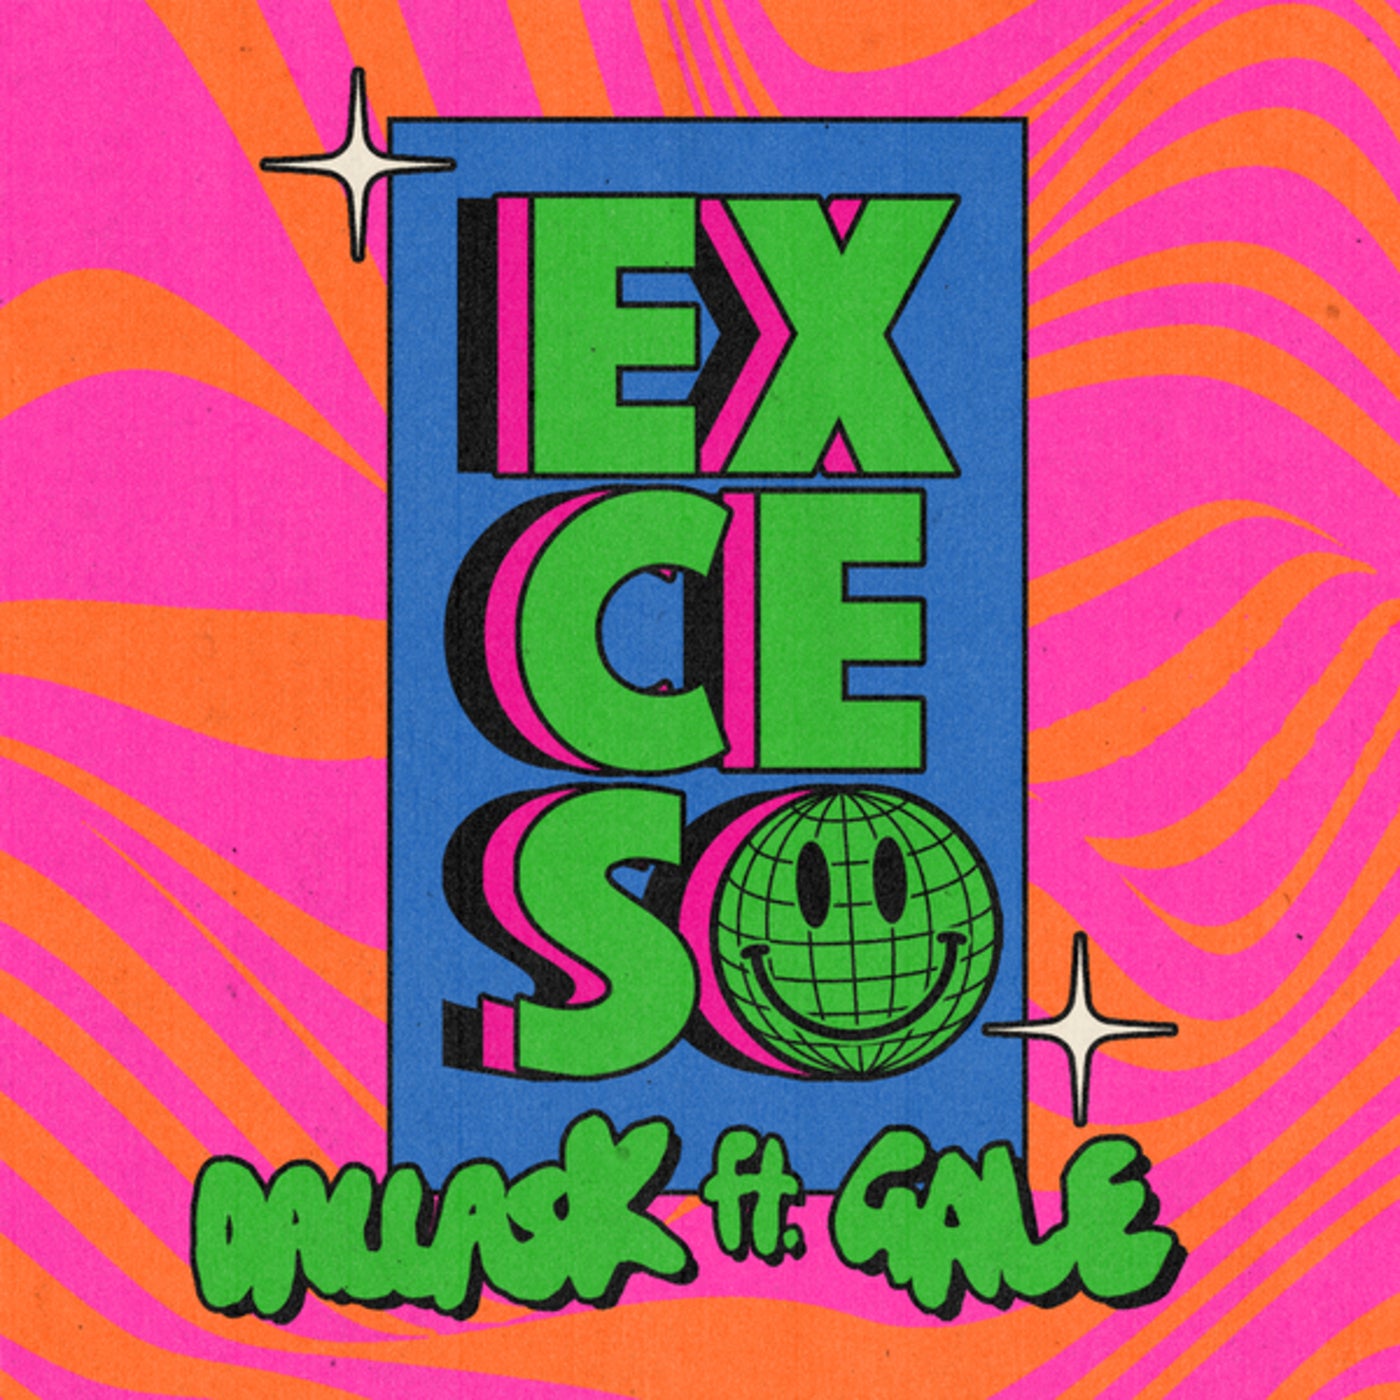 Exceso (Extended Mix)